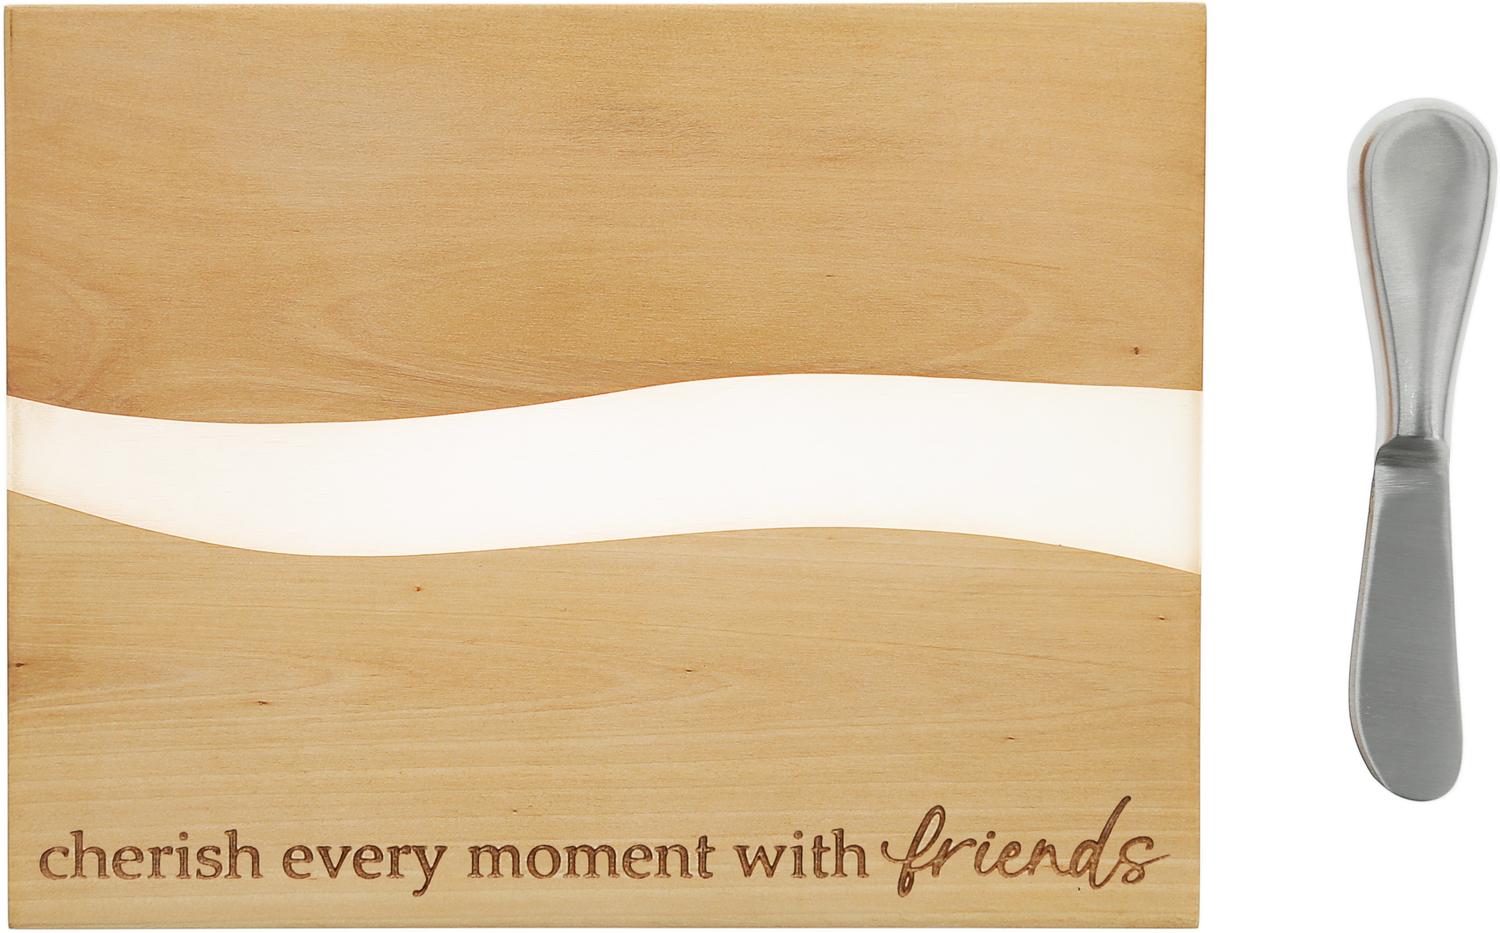 Friends by Thoughts of Home - Friends - 9" Wood & Resin Cheese/Bread Board Set